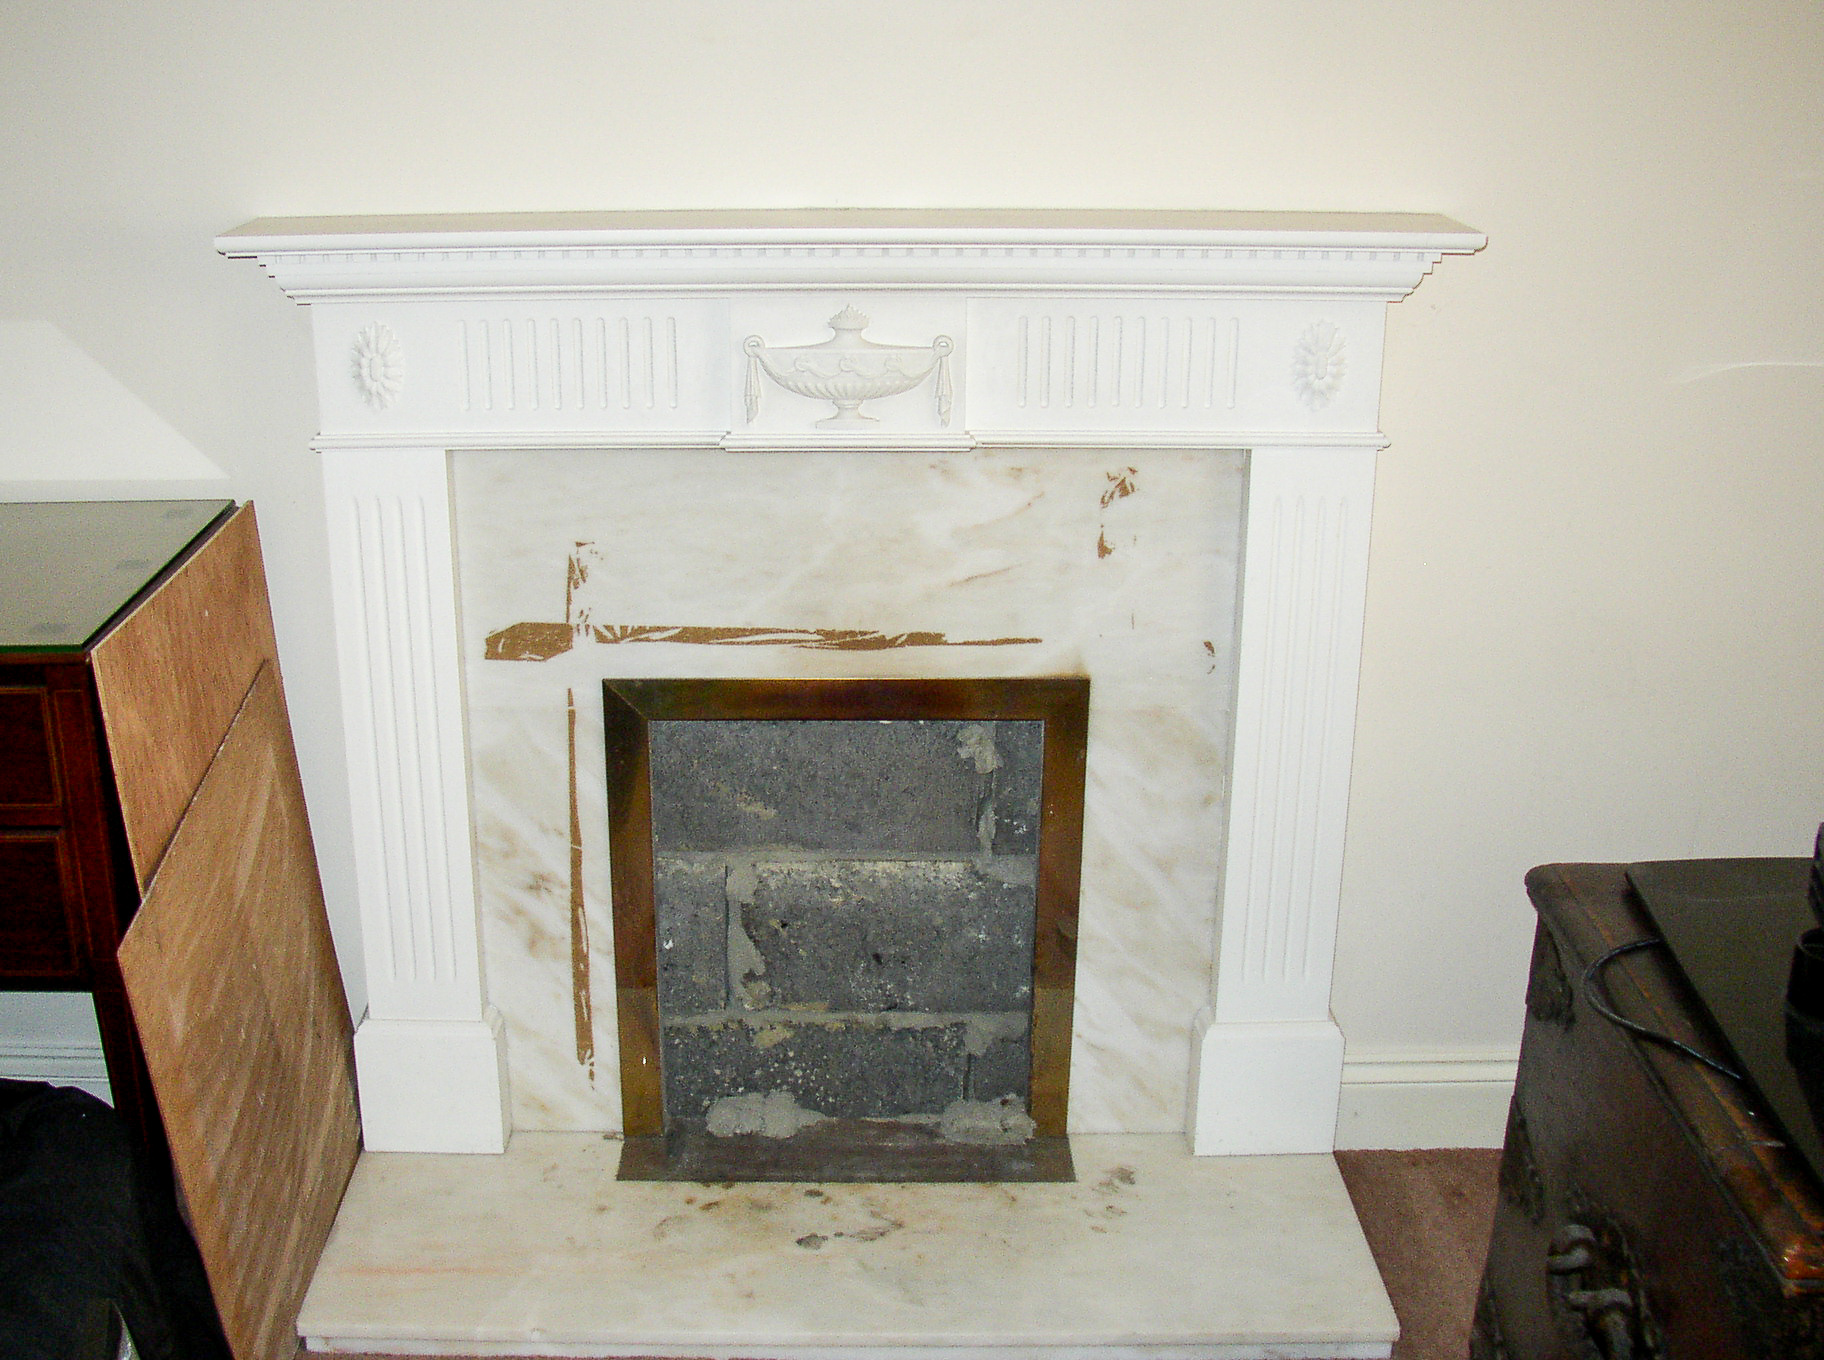 Bricked up fireplace